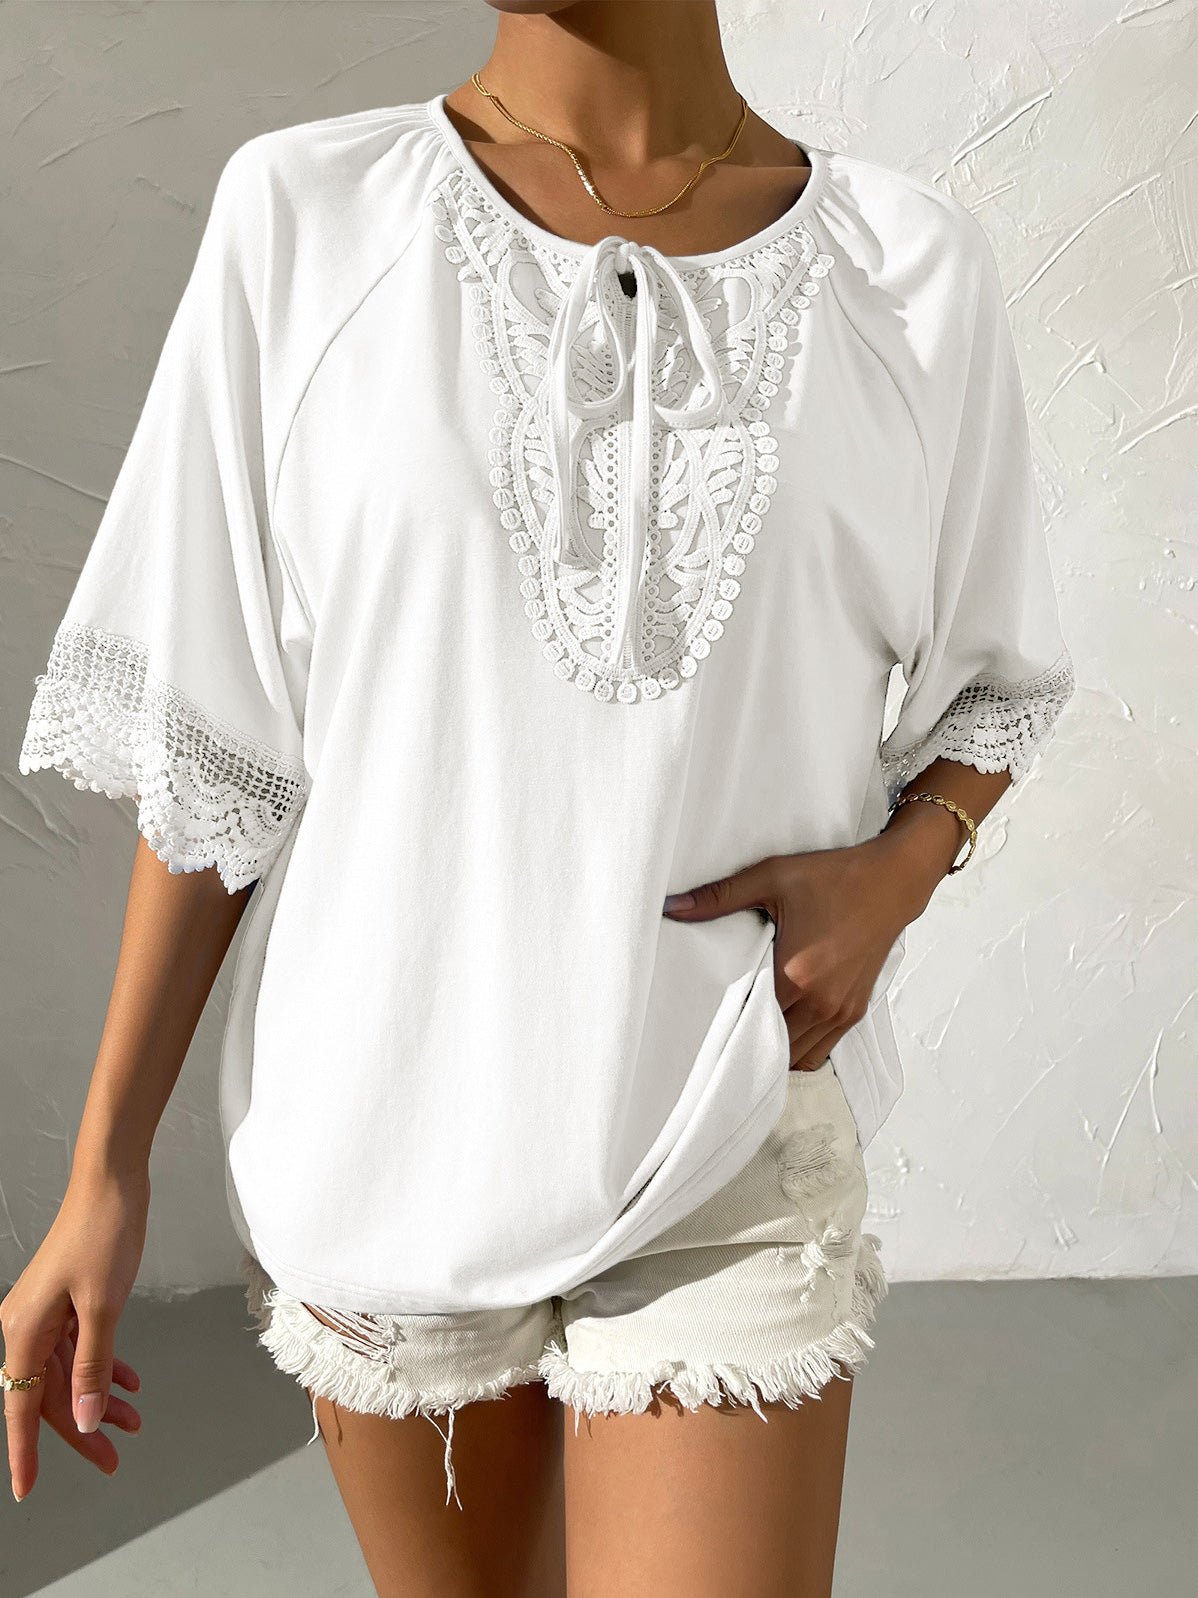 Women's T-Shirts Loose Round Neck Lace Short Sleeve T-Shirt